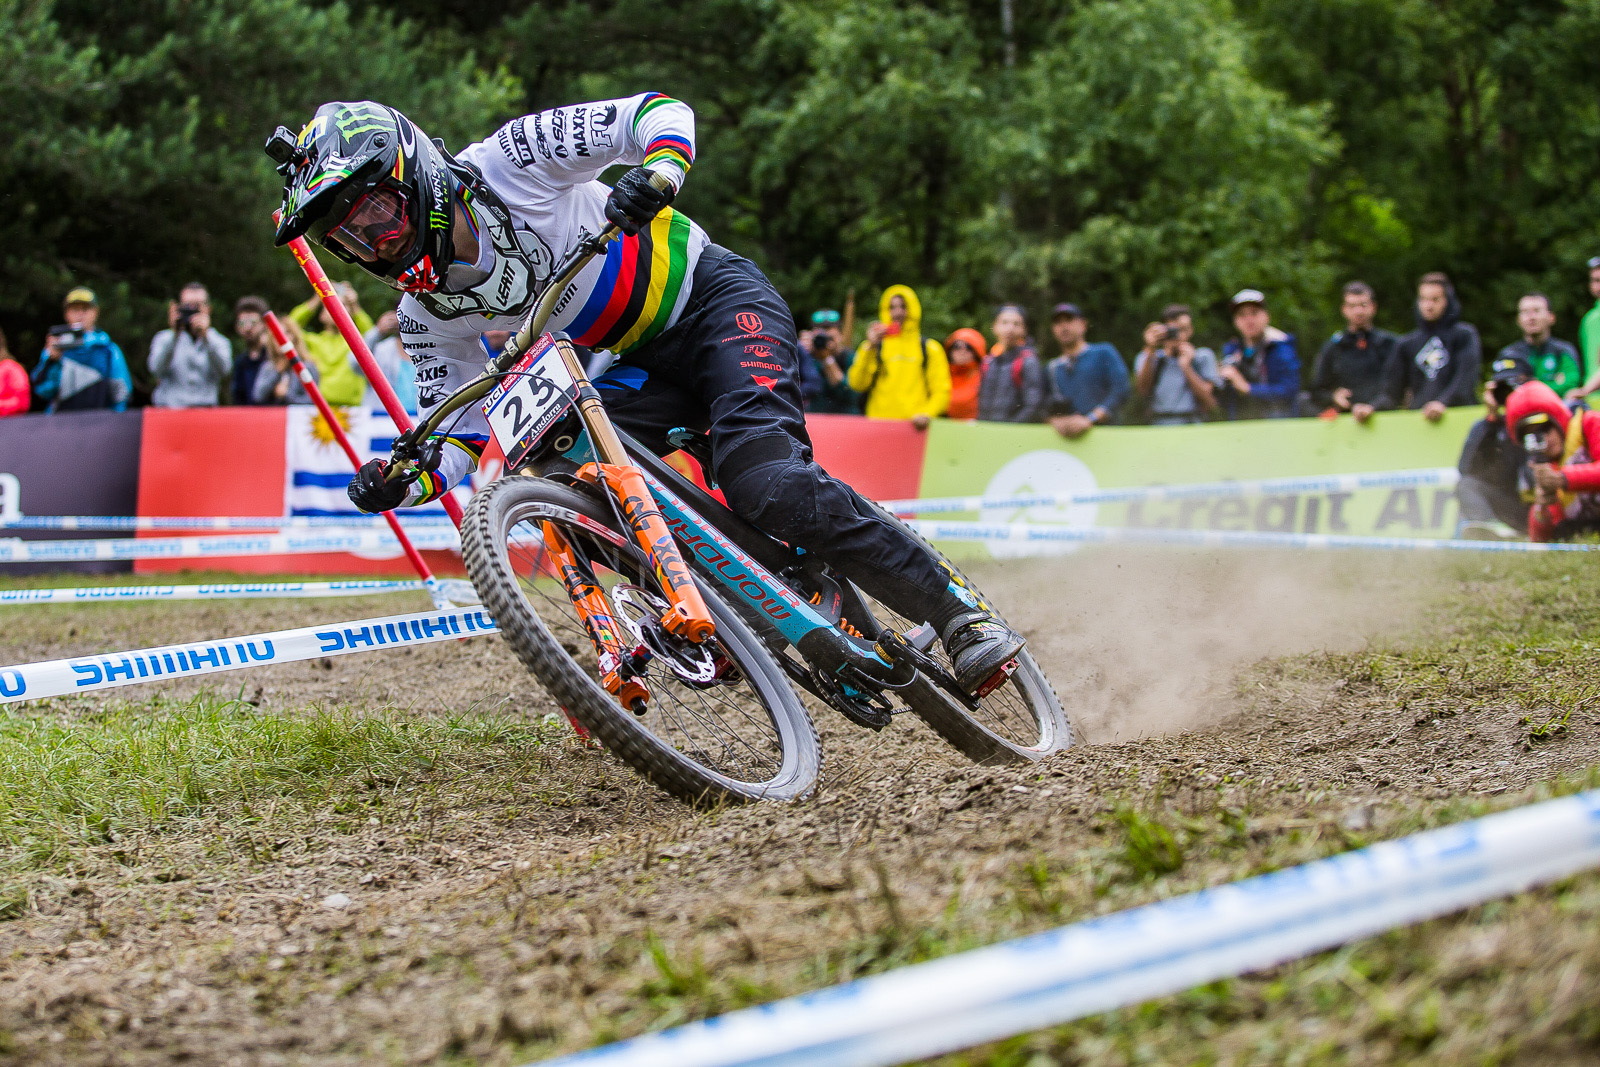 Monster Energy’s Danny Hart Takes Third Place at the UCI MTB World Cup Round 4 in Vallnord, Andorra